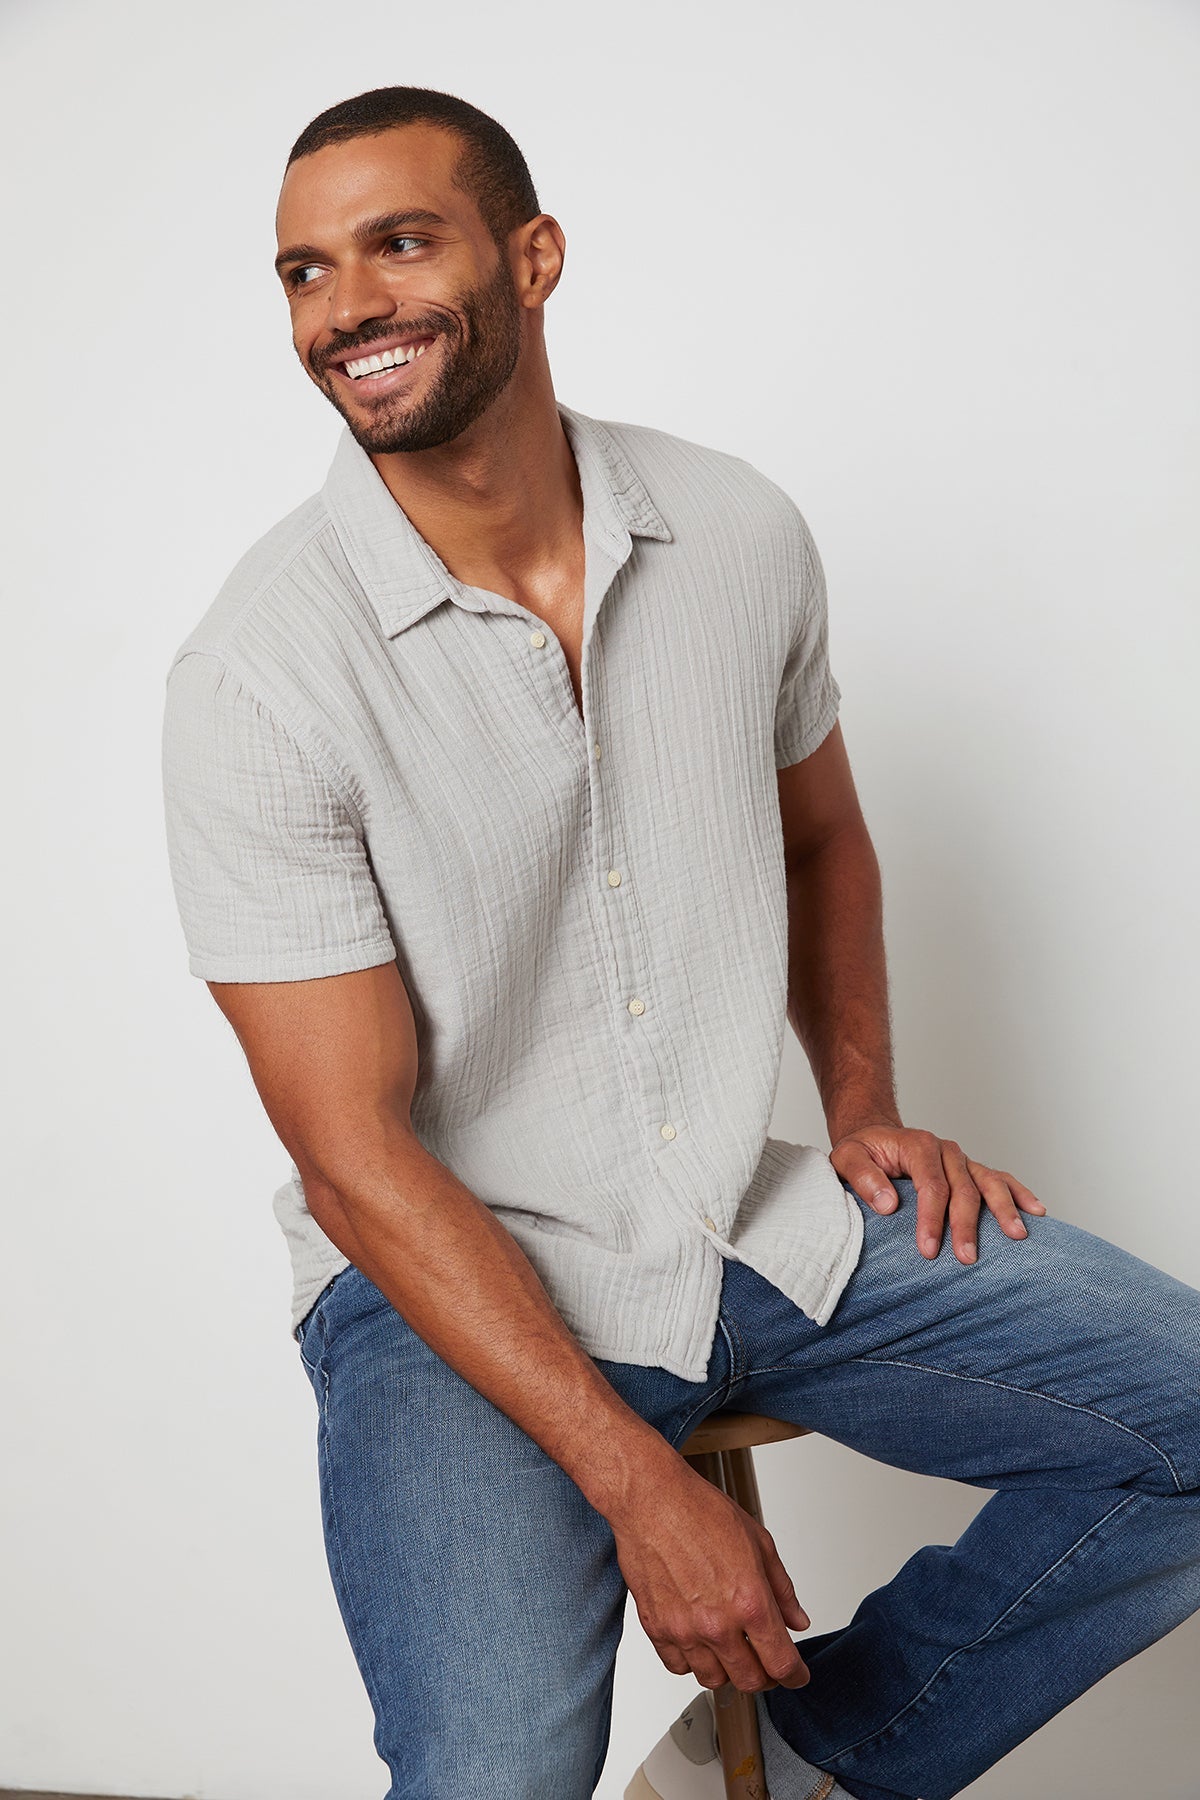   Cotton gauze Christian button up shirt in light grey with model smiling and sitting on stool. 